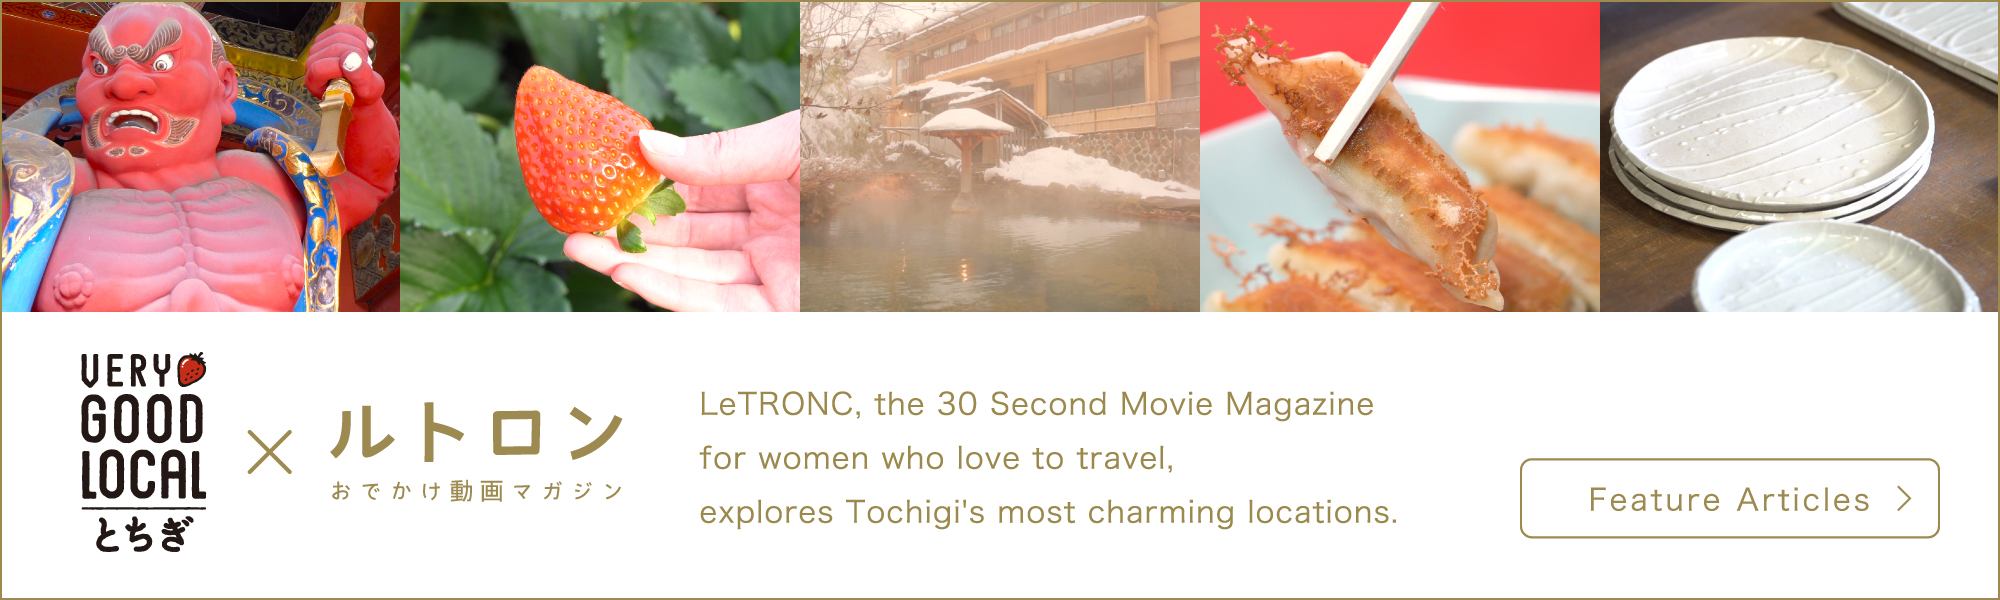 LeTRONC, the 30 Second Movie Magazine for women who love to travel, explores Tochigi's most charming locations.